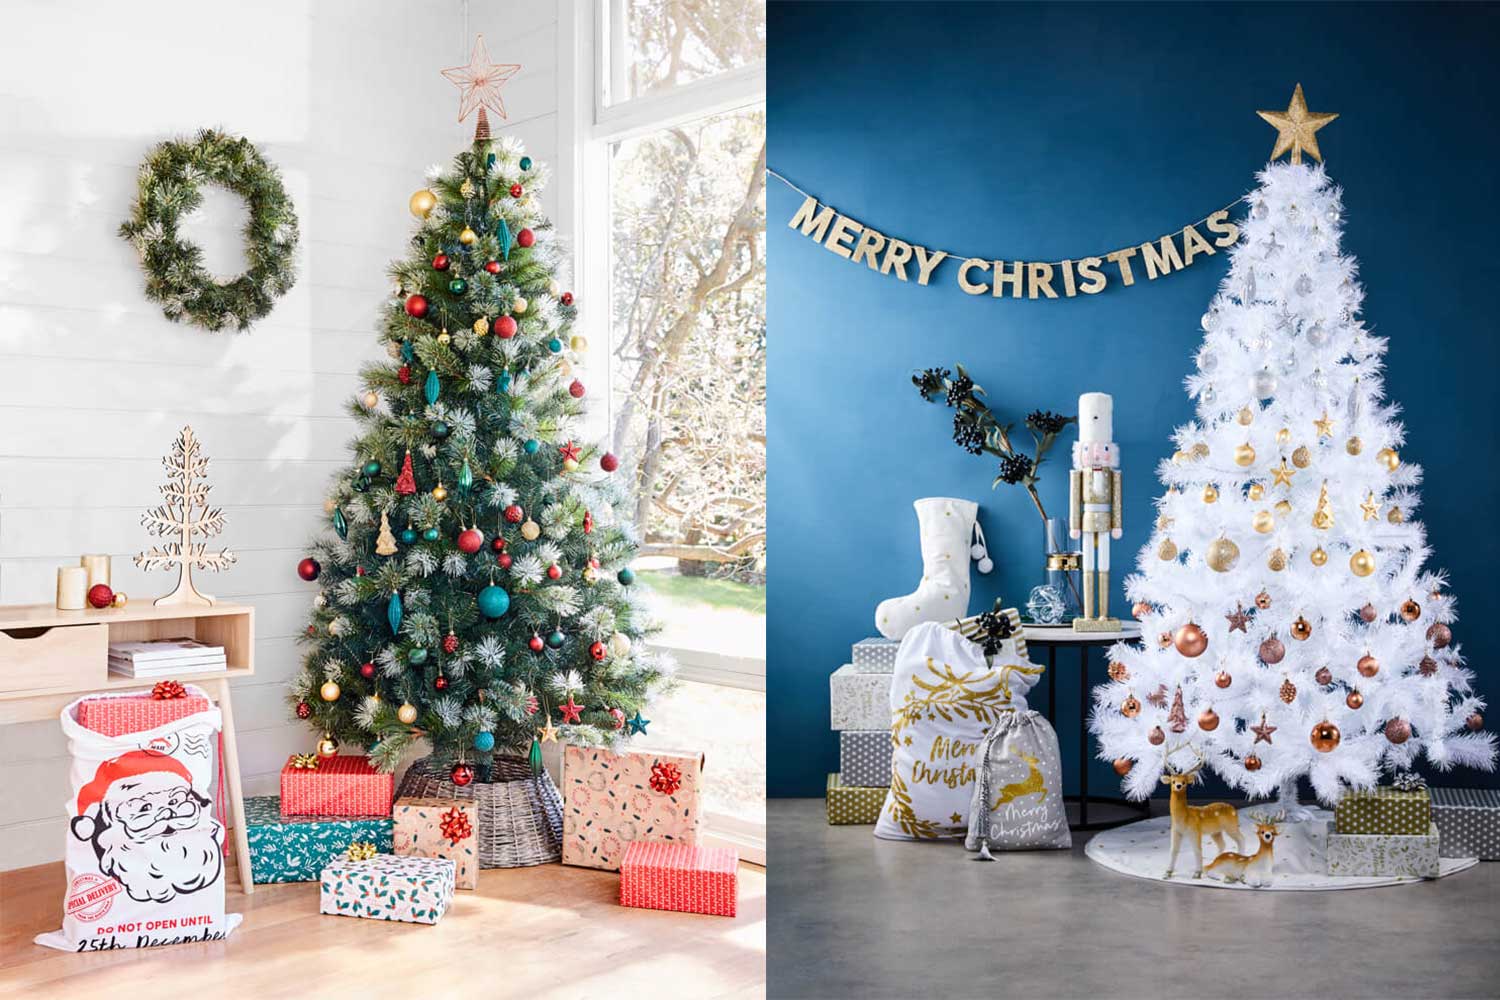 Top 10 Kmart Christmas decorations | Better Homes and Gardens